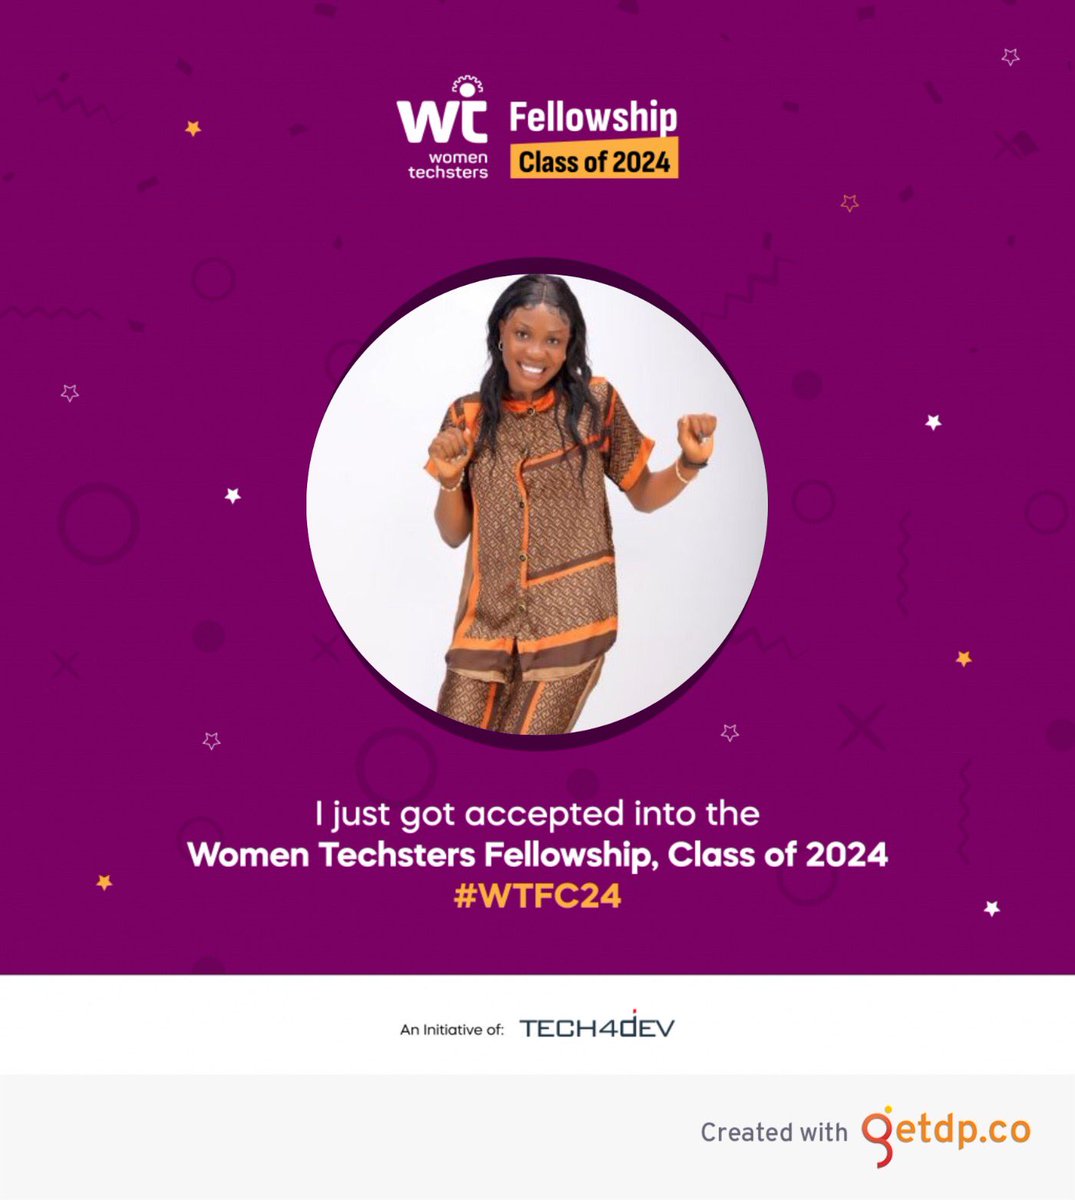 Yipee The Journey Begins, So glad to Finally Begin my baby steps into greater things. Becoming TechSis 
#WTFC24 #WomanTechstersFellowship #AfricanWomanInTechnology #WTFC24Orientation
#Tech4Dev